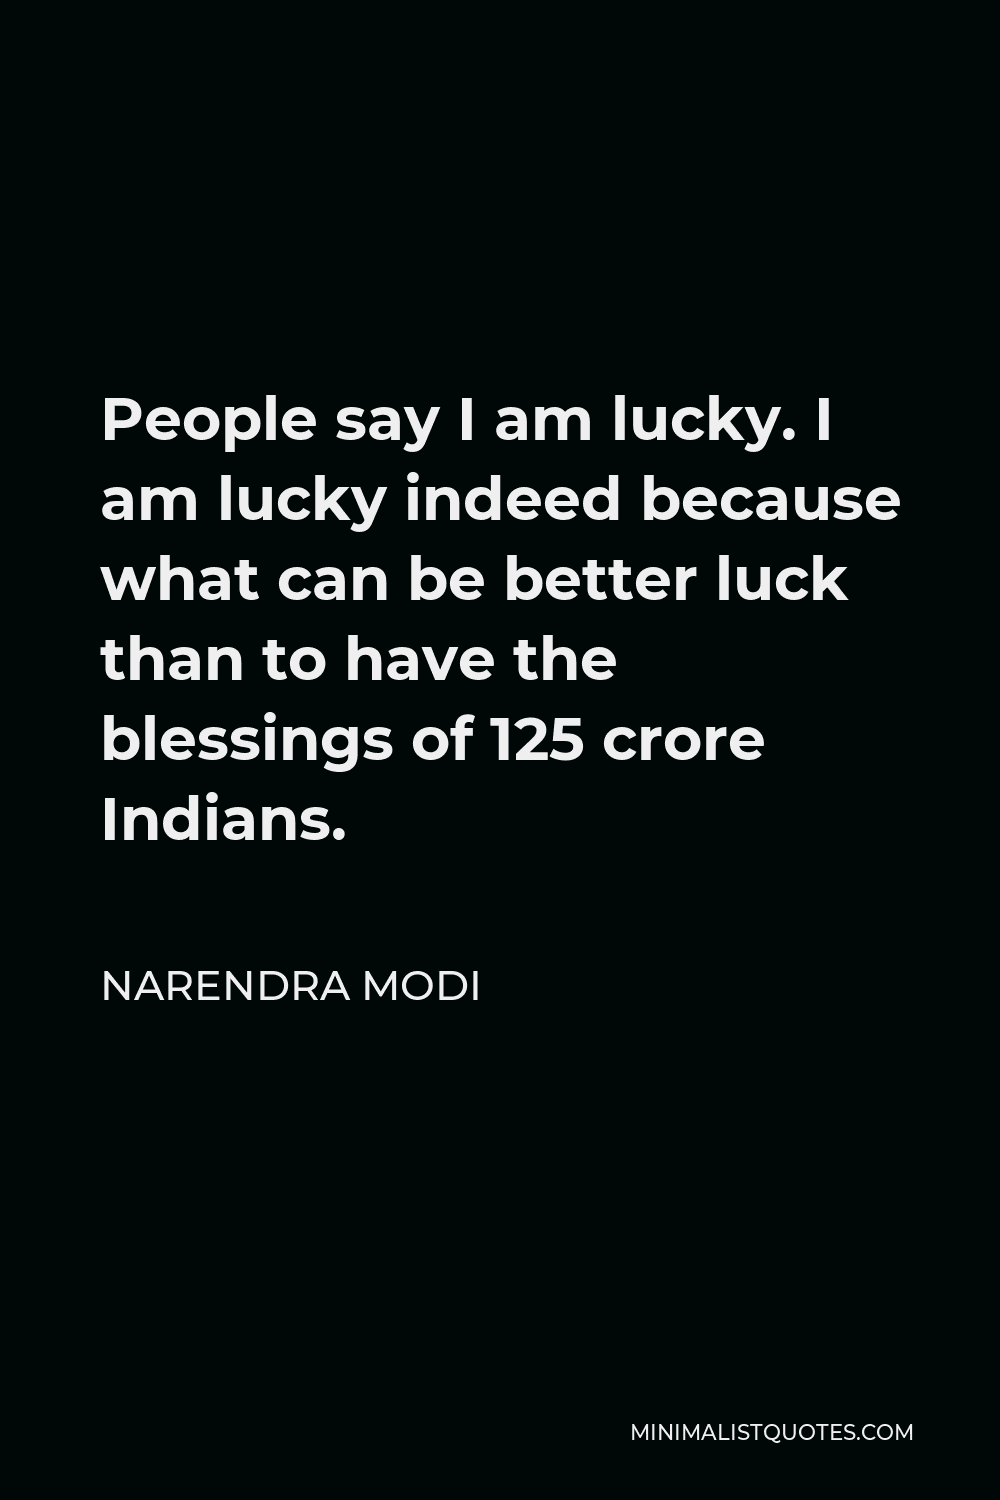 Narendra Modi Quote - People say I am lucky. I am lucky indeed because what can be better luck than to have the blessings of 125 crore Indians.